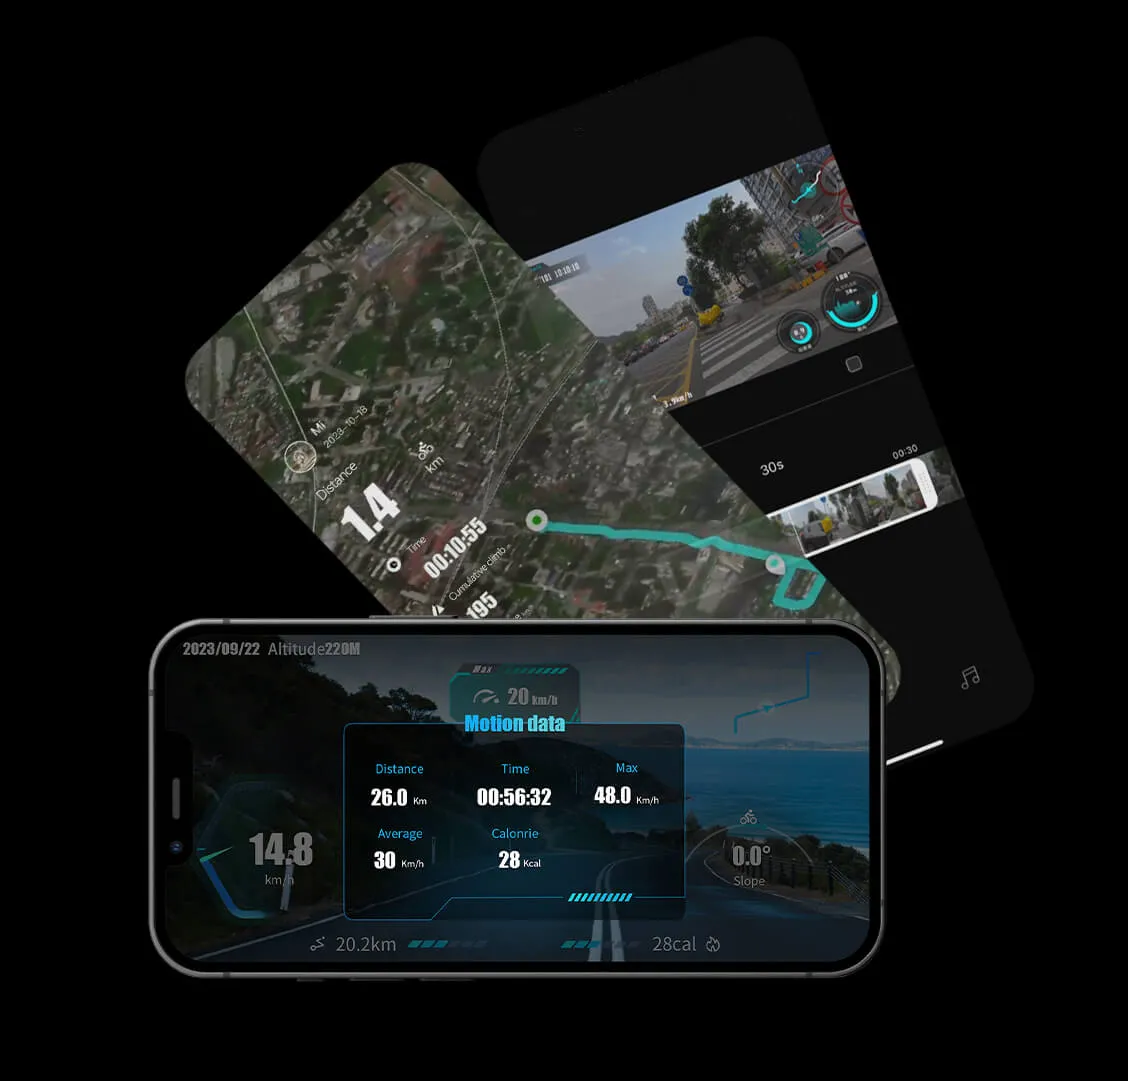 Display of the Ranger Riding Camera app features, showing GPS navigation, video playback, and motion data on a smartphone screen.